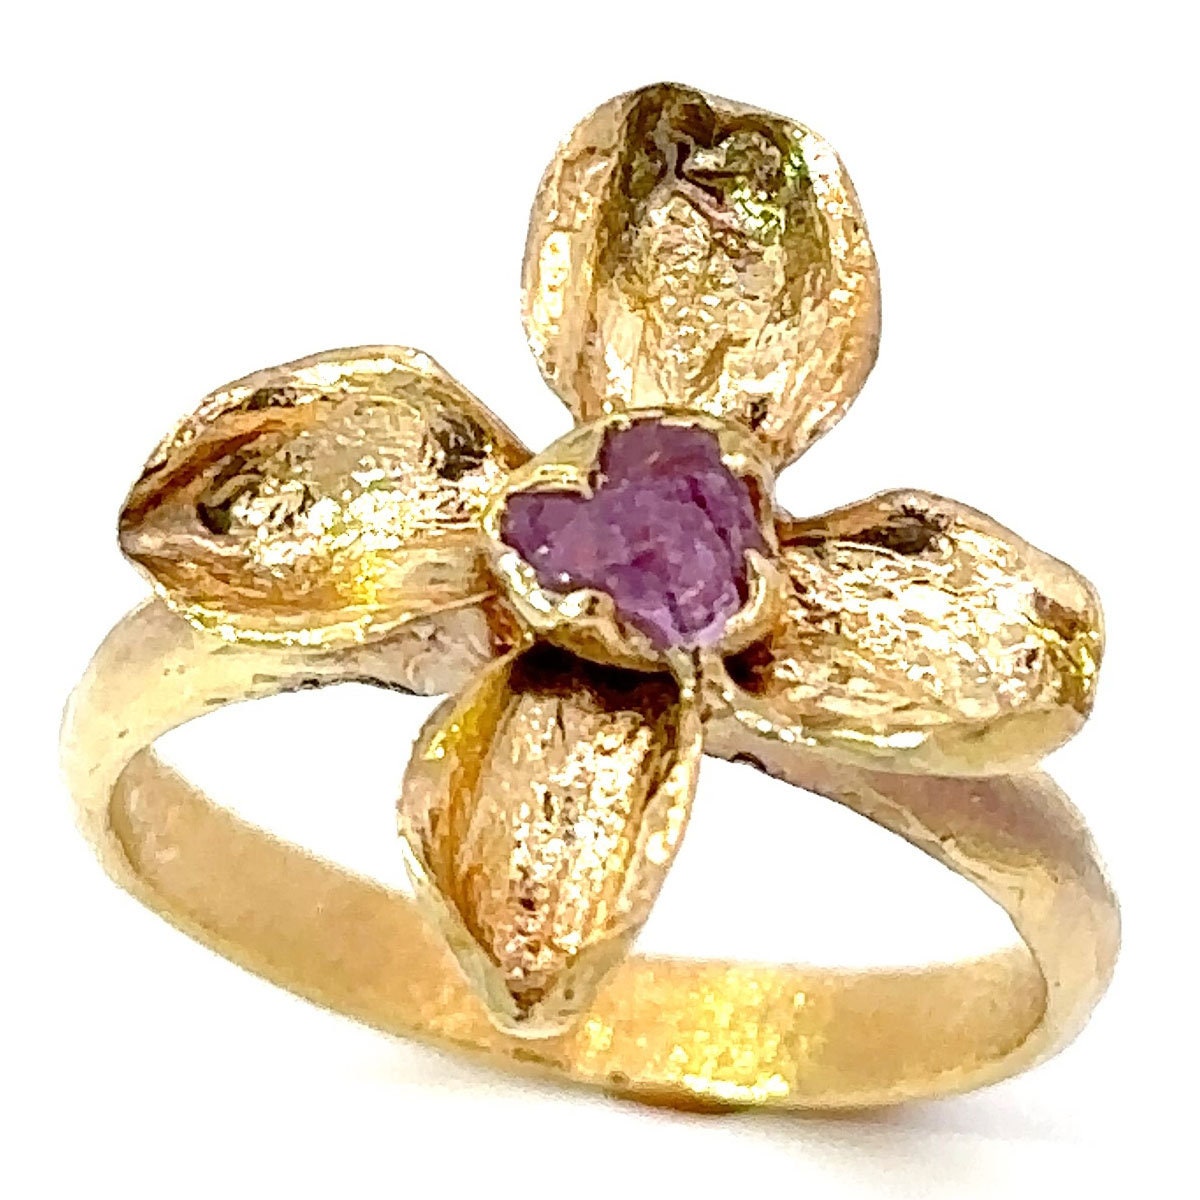 Real Flower and pink Sapphire 18k Yellow gold wedding engagement ring Enchanted Garden Floral Ring byAngeline 3267